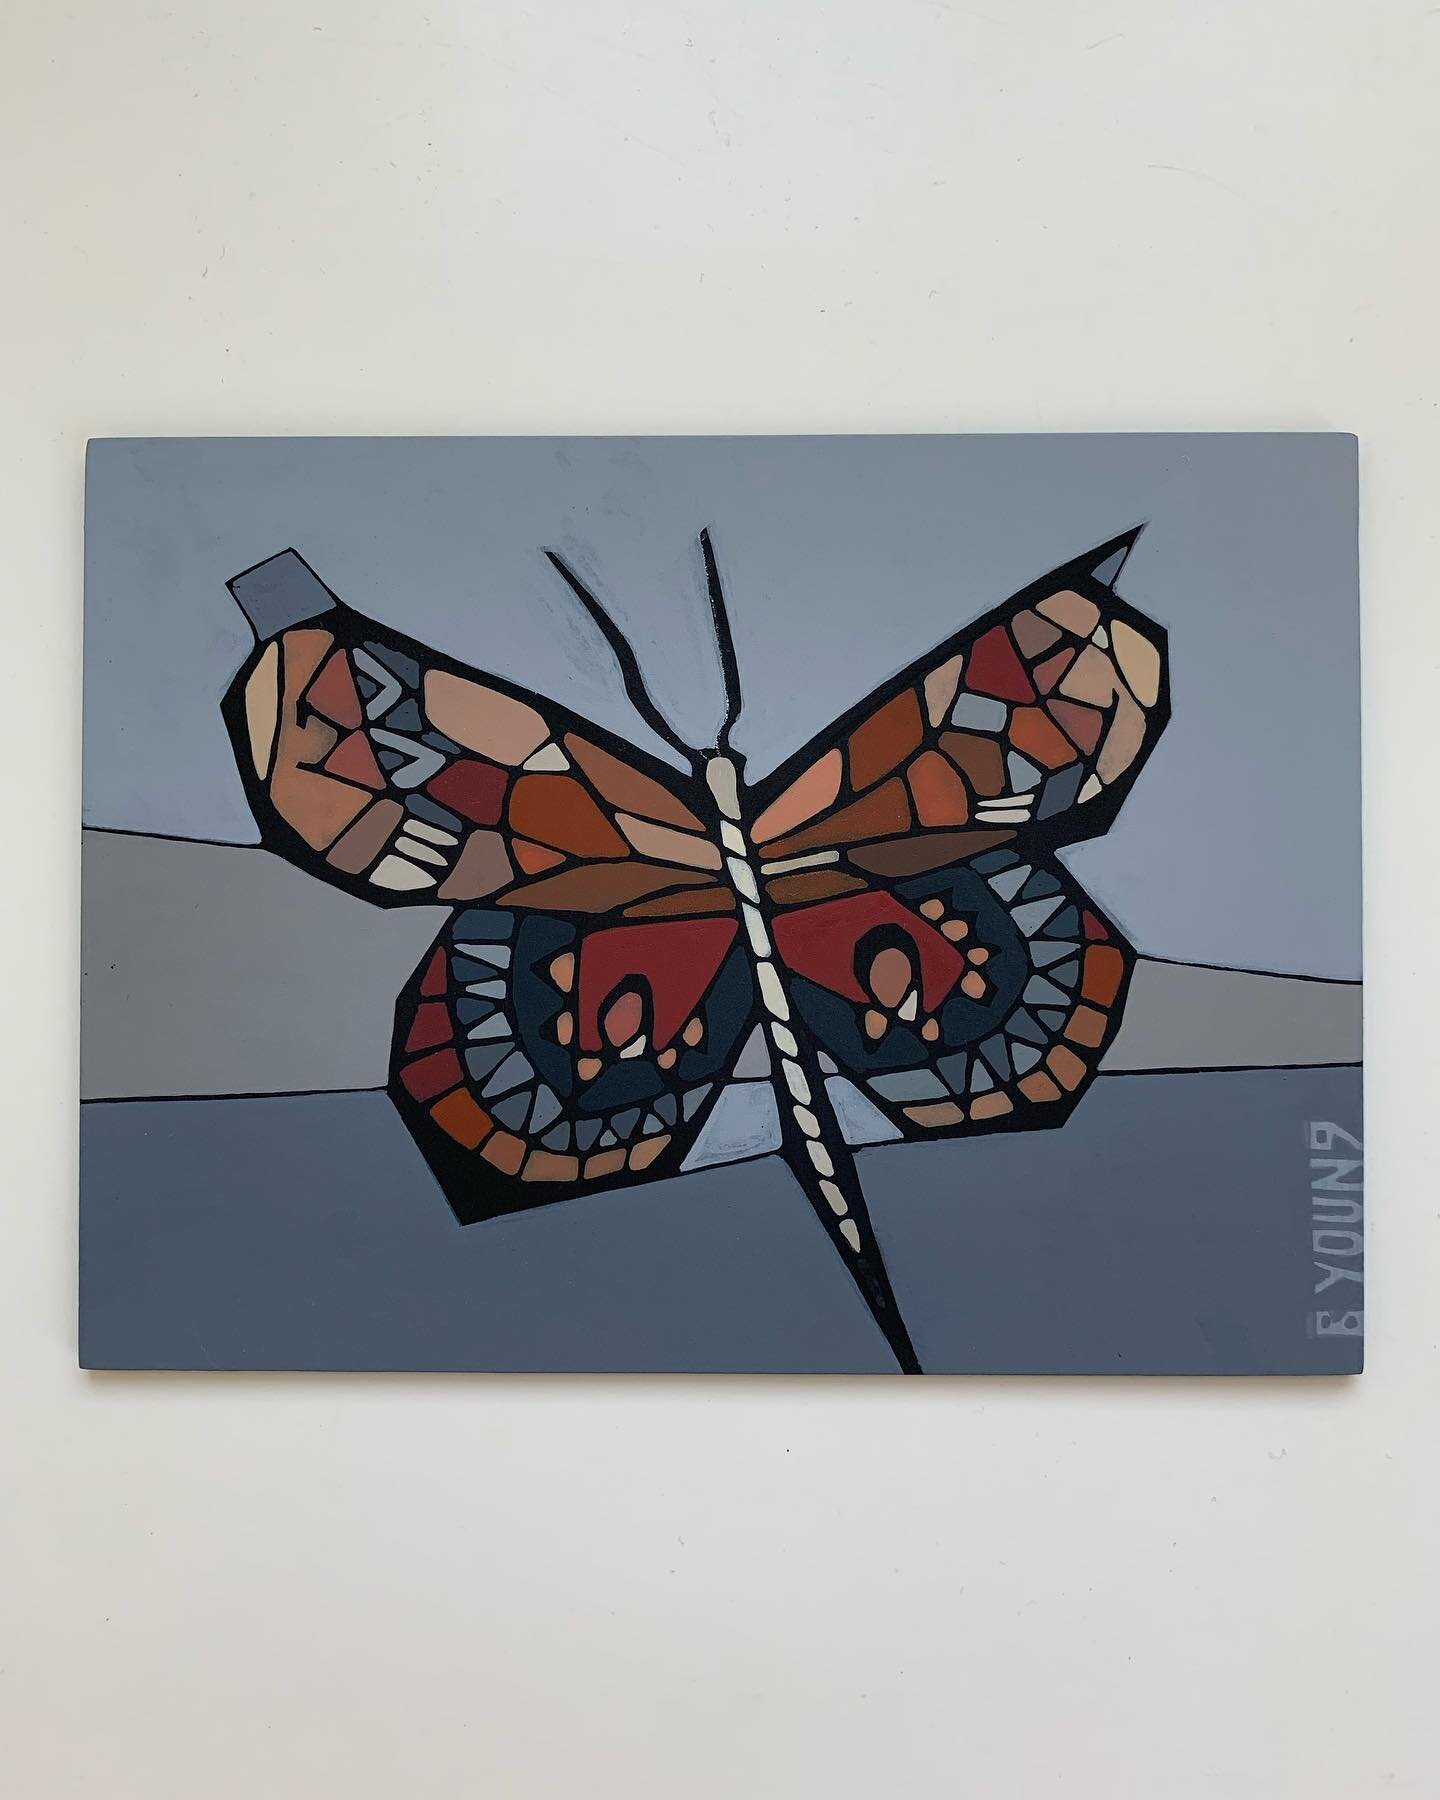 I finished another butterfly (which reminds me of my dad) for the 135 Fine Art Show @utahartmarket .  The show is at a new location, Cottonwood Country Club. One day only. TOMORROW, November 11th 5-8pm. So many great artists to meet and enjoy their w